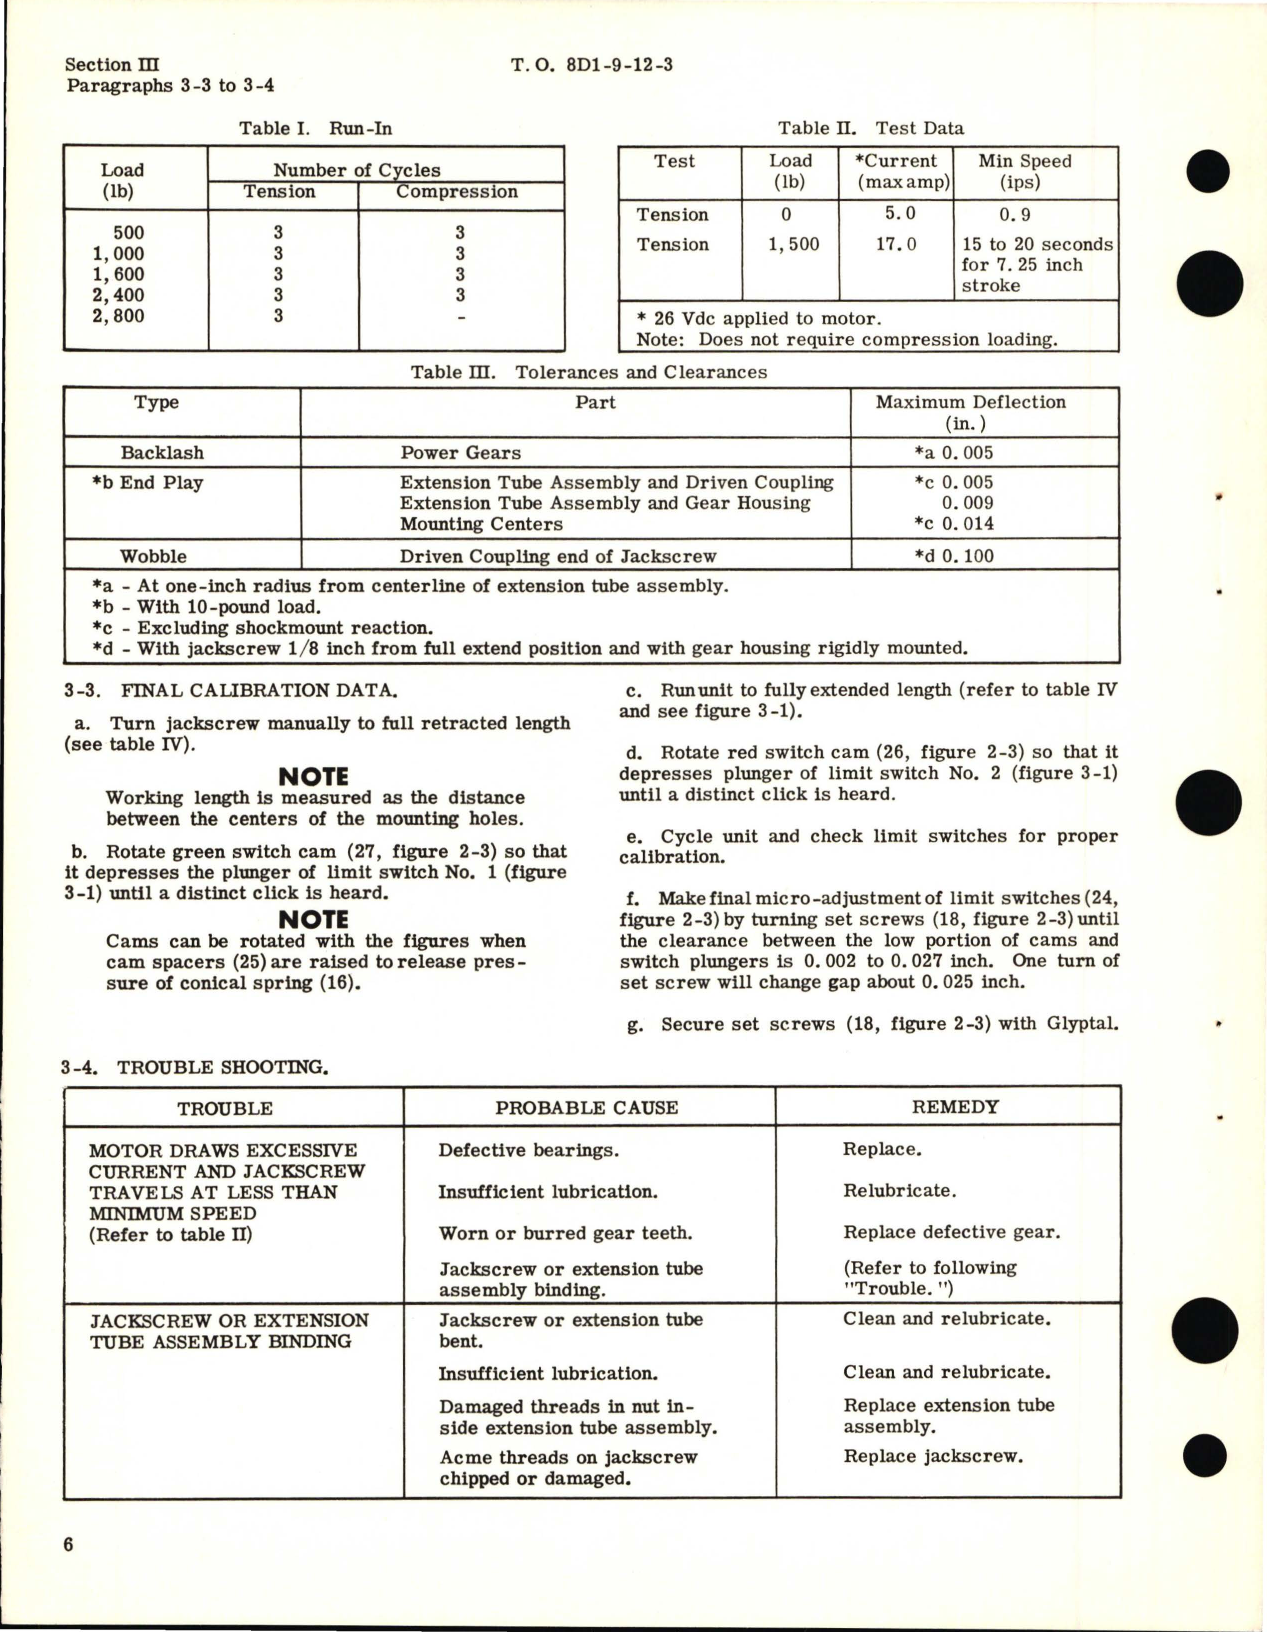 Sample page 8 from AirCorps Library document: Overhaul Instructions for Linear Actuator Assembly 423 Series